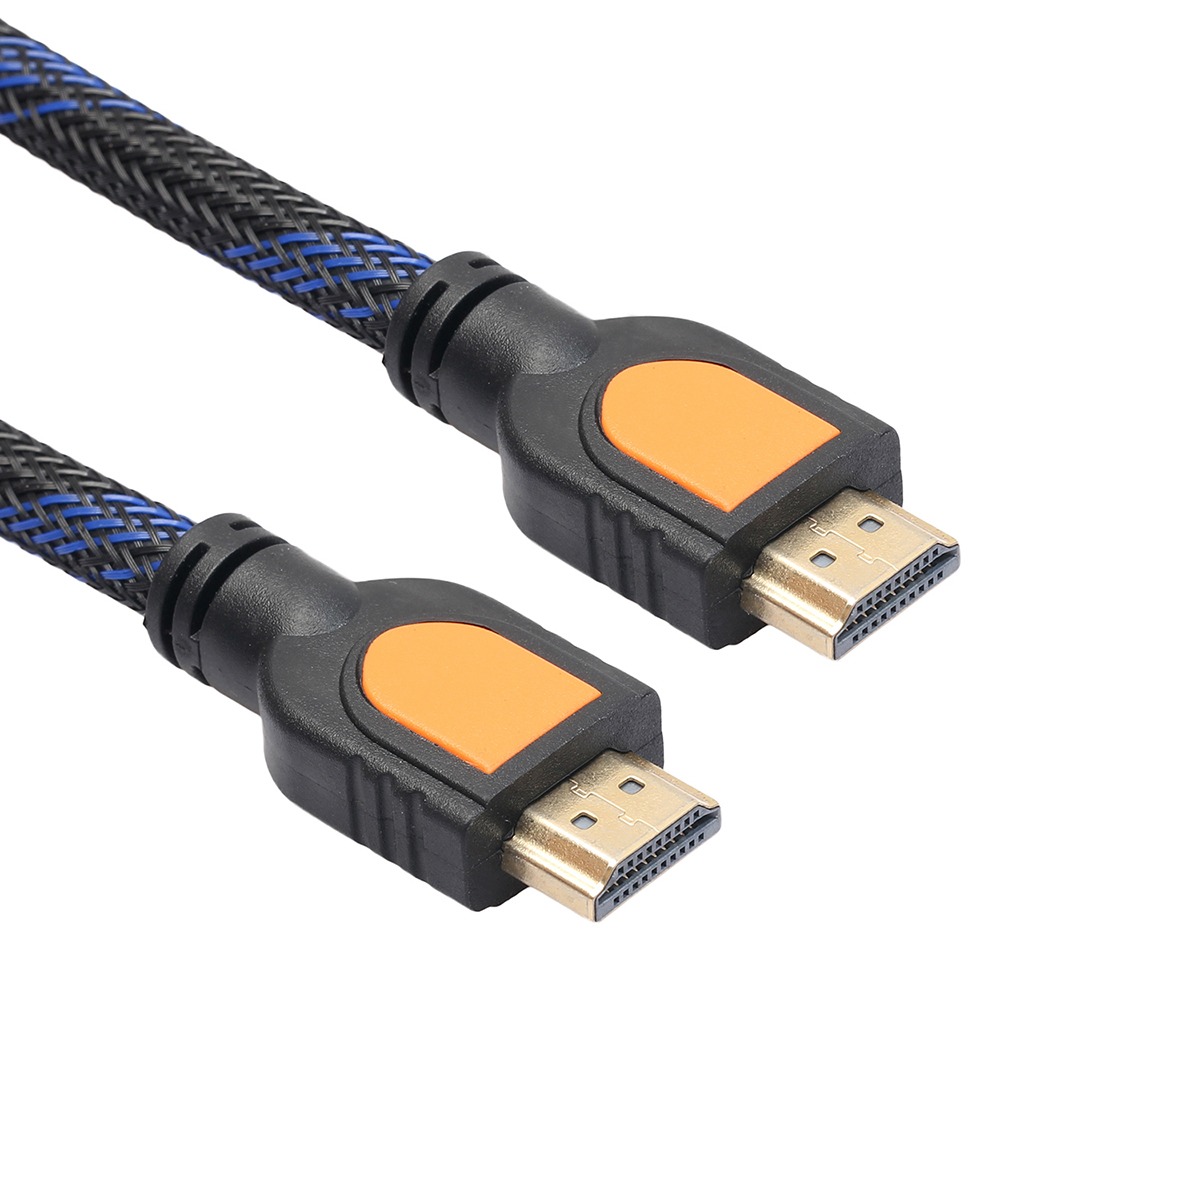 Ultra HD HDMI Braided Cable High Speed Ethernet HDTV Cable 0.5M